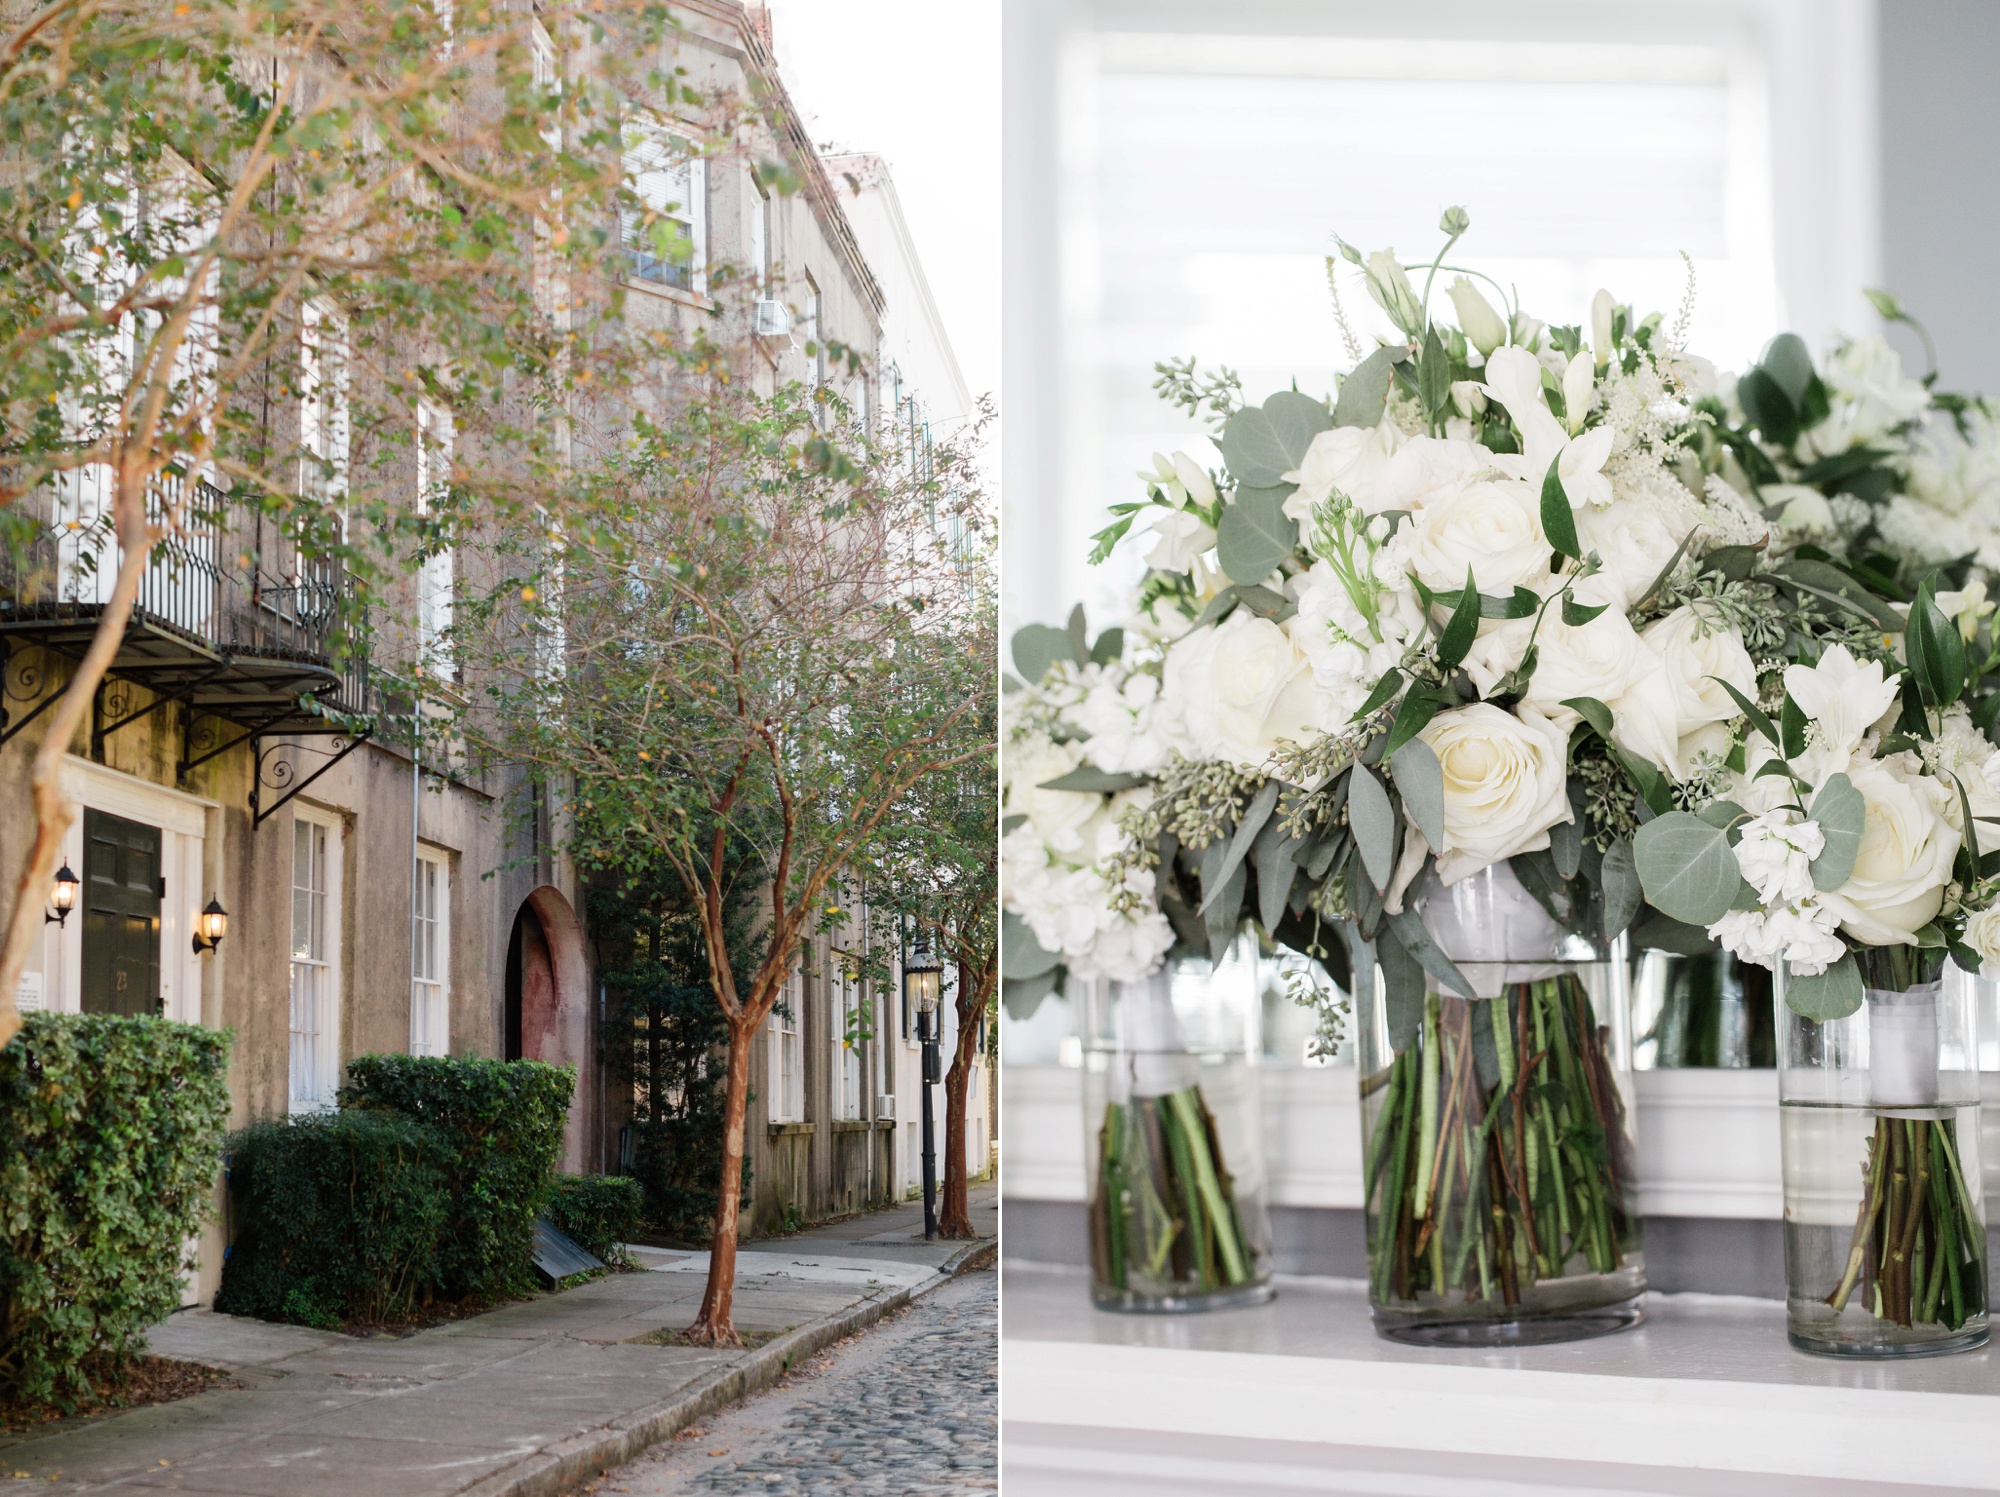 Downtown Charleston is the perfect setting for a first look. Photos by Destination wedding photographer, Rebecca Cerasani